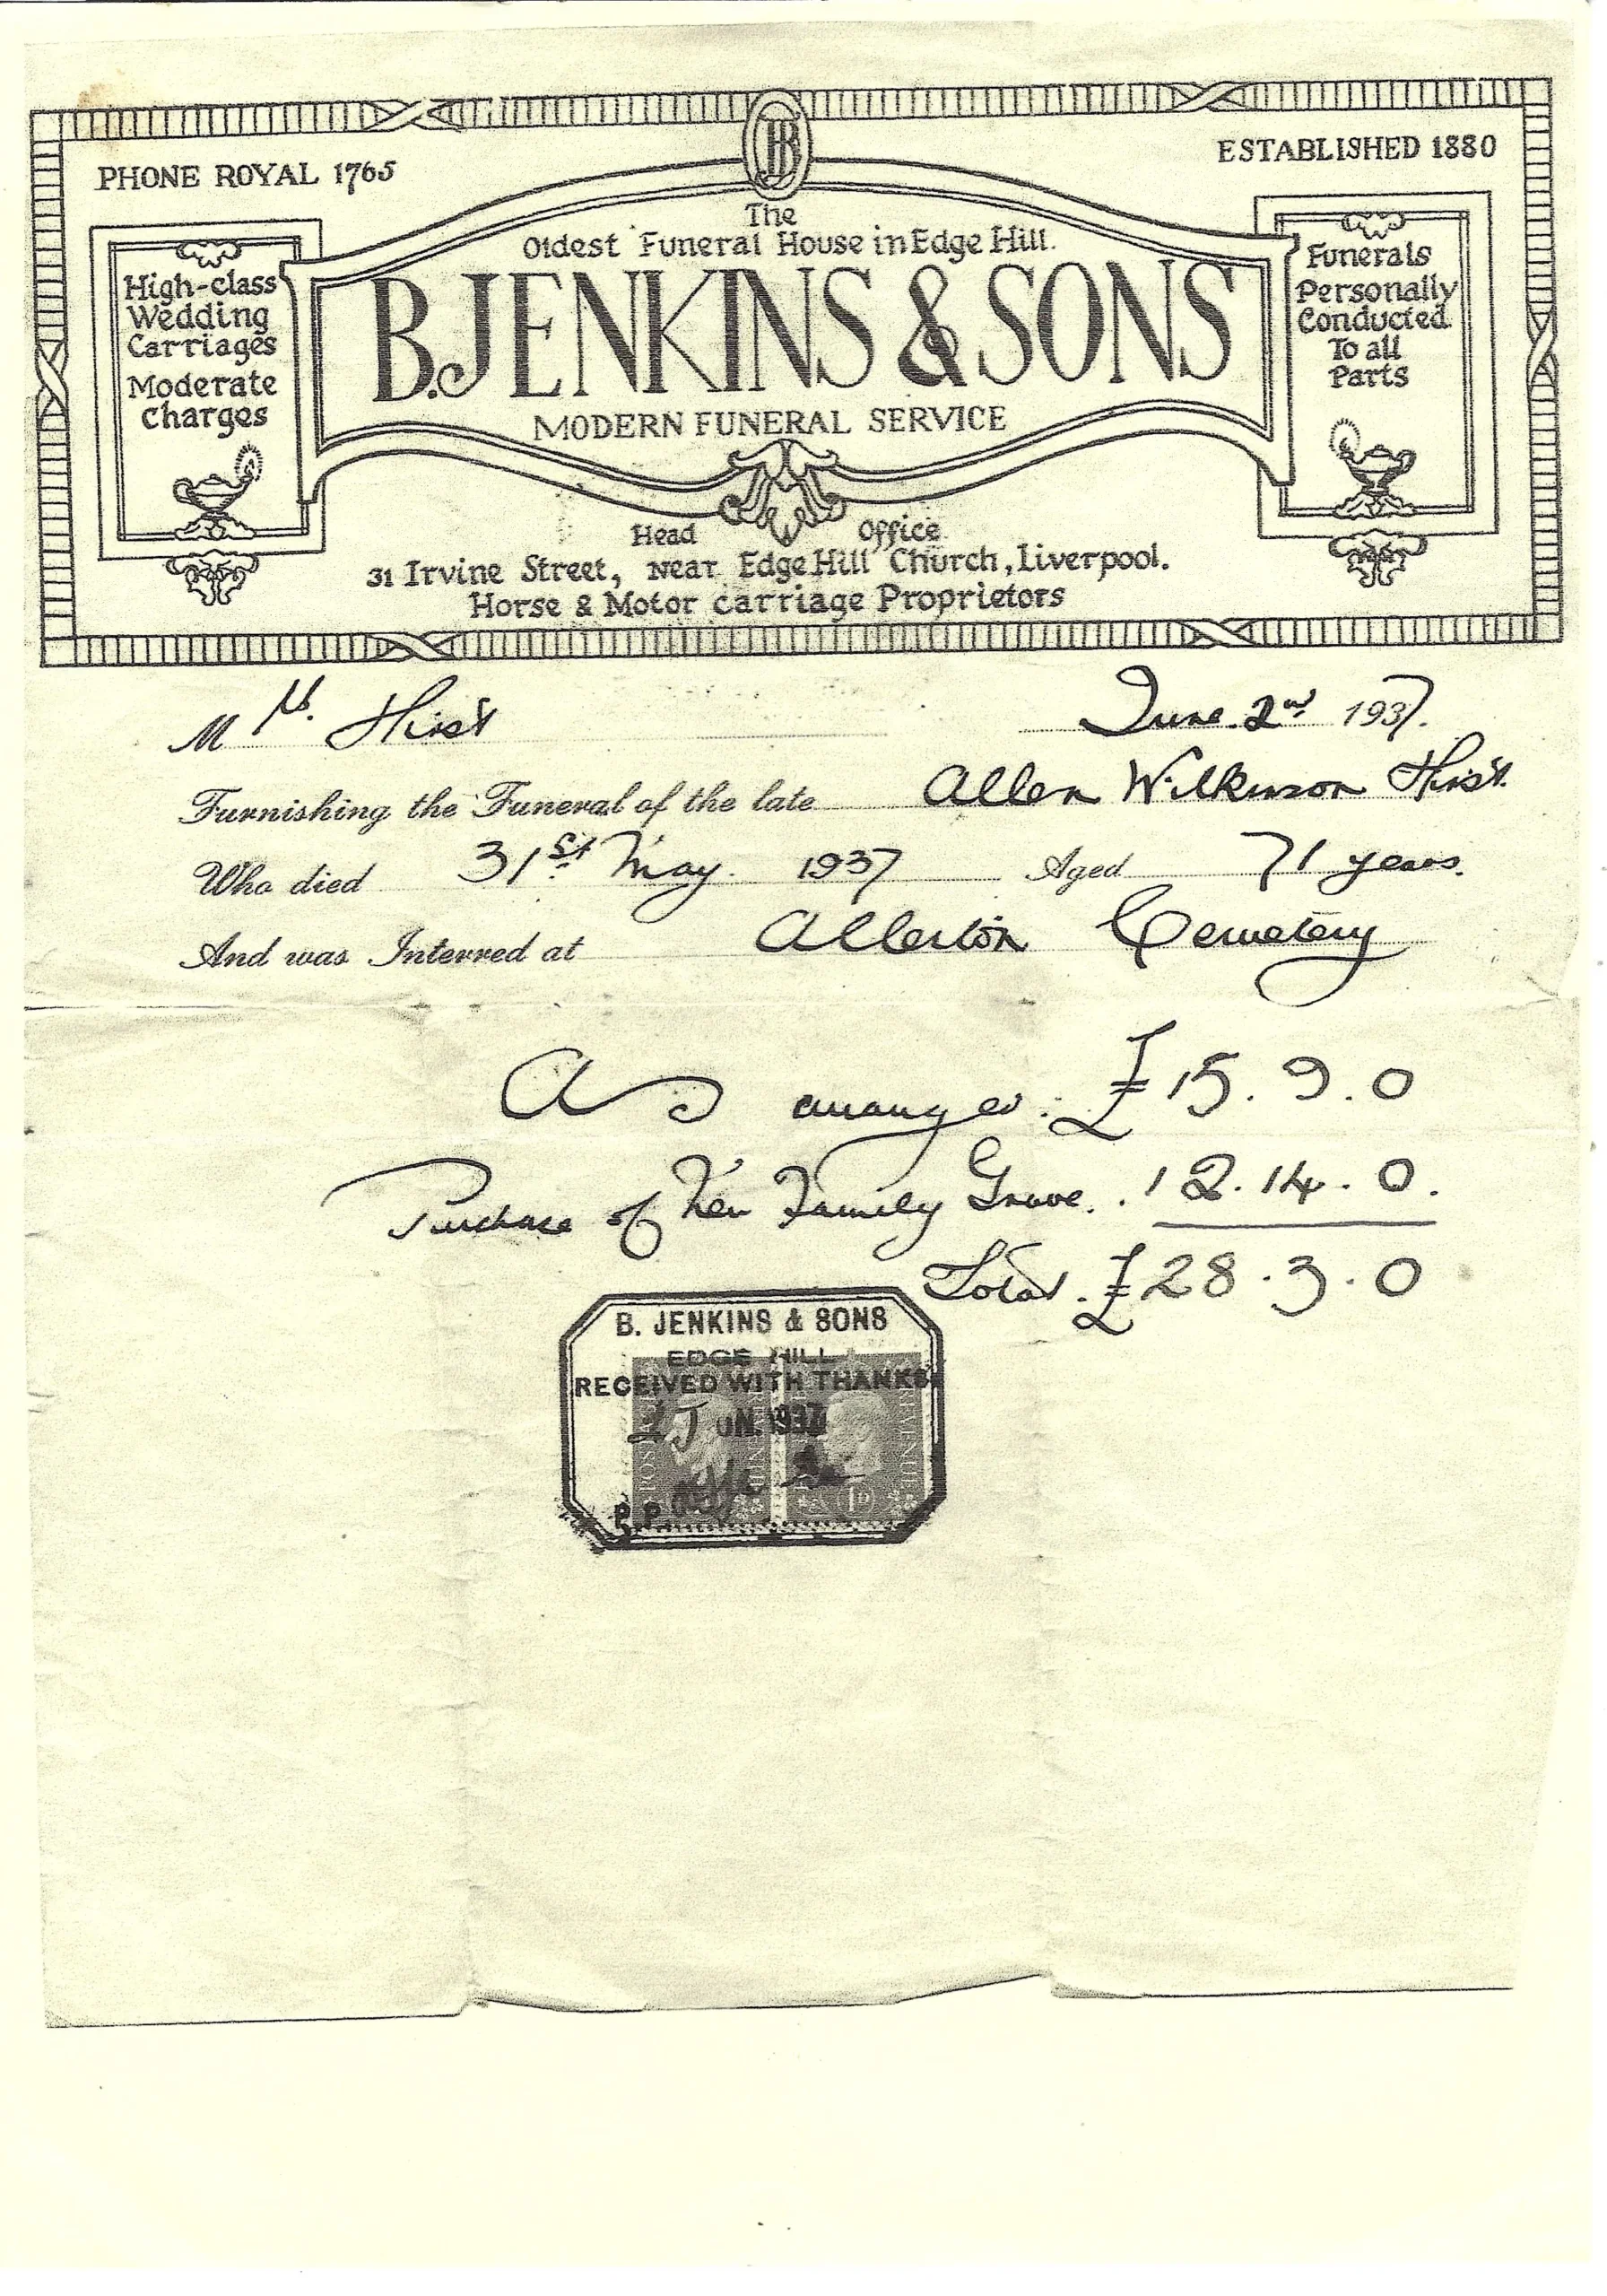 An old Funeral Account Invoice from 1930's